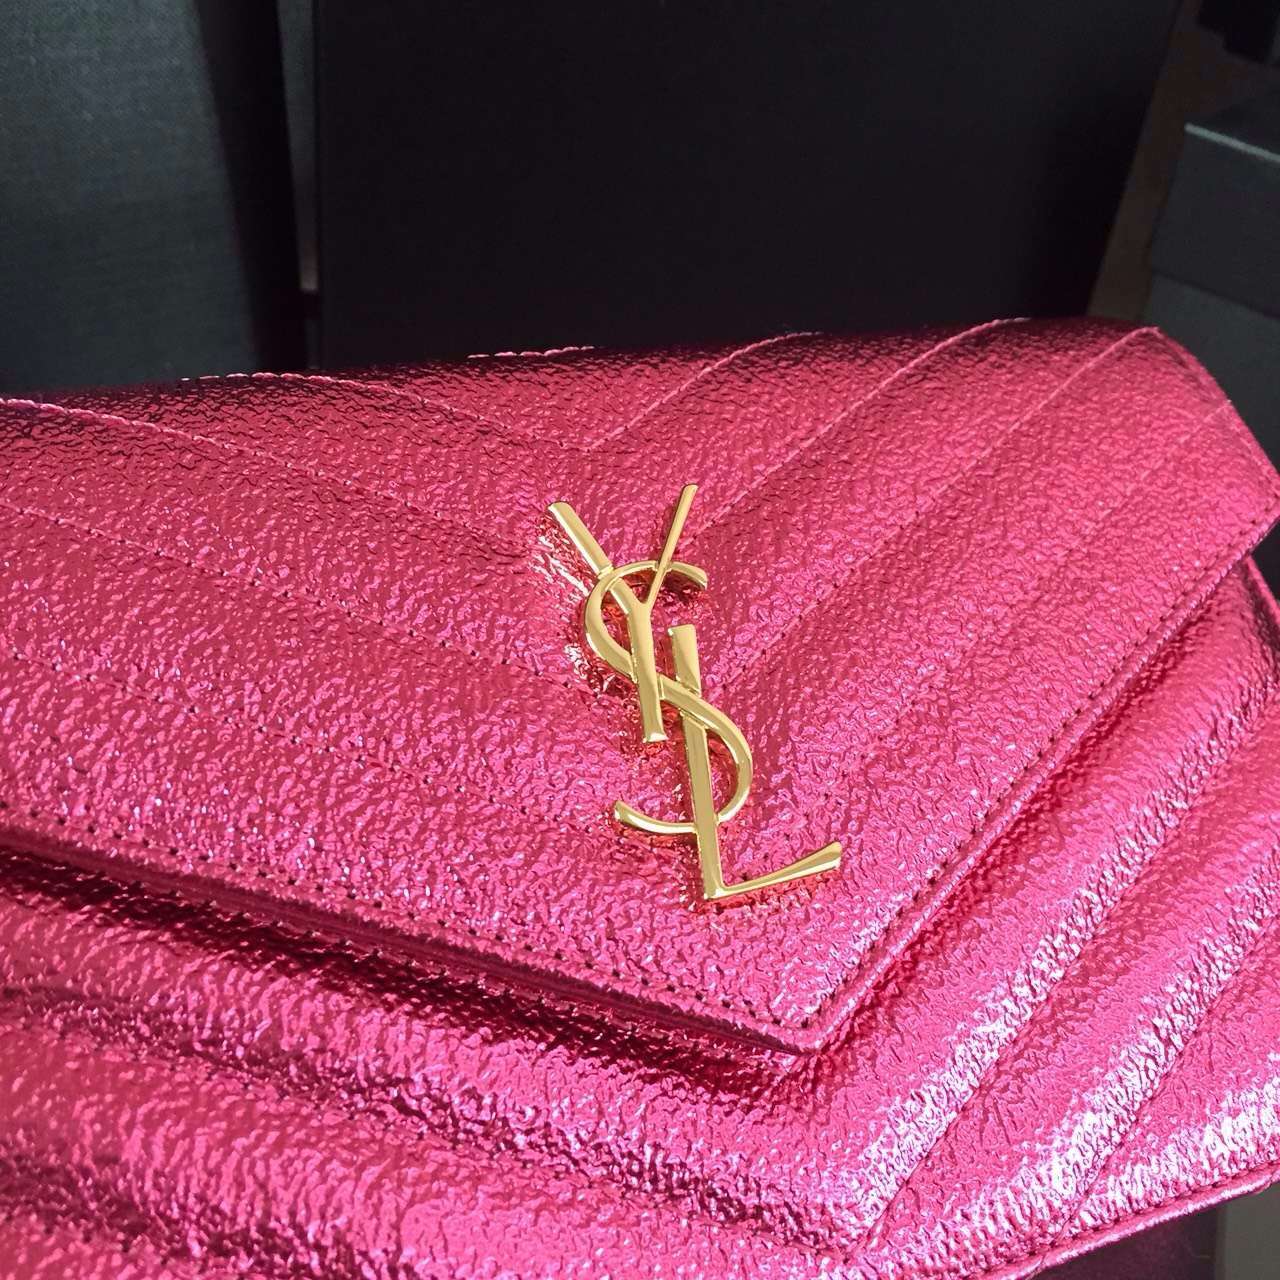 2016 Cheap YSL Out Sale with Free Shipping-Saint Laurent Monogram Envelope Chain Wallet in Lipstick Fuchsia Grained Matelasse Metallic Leather